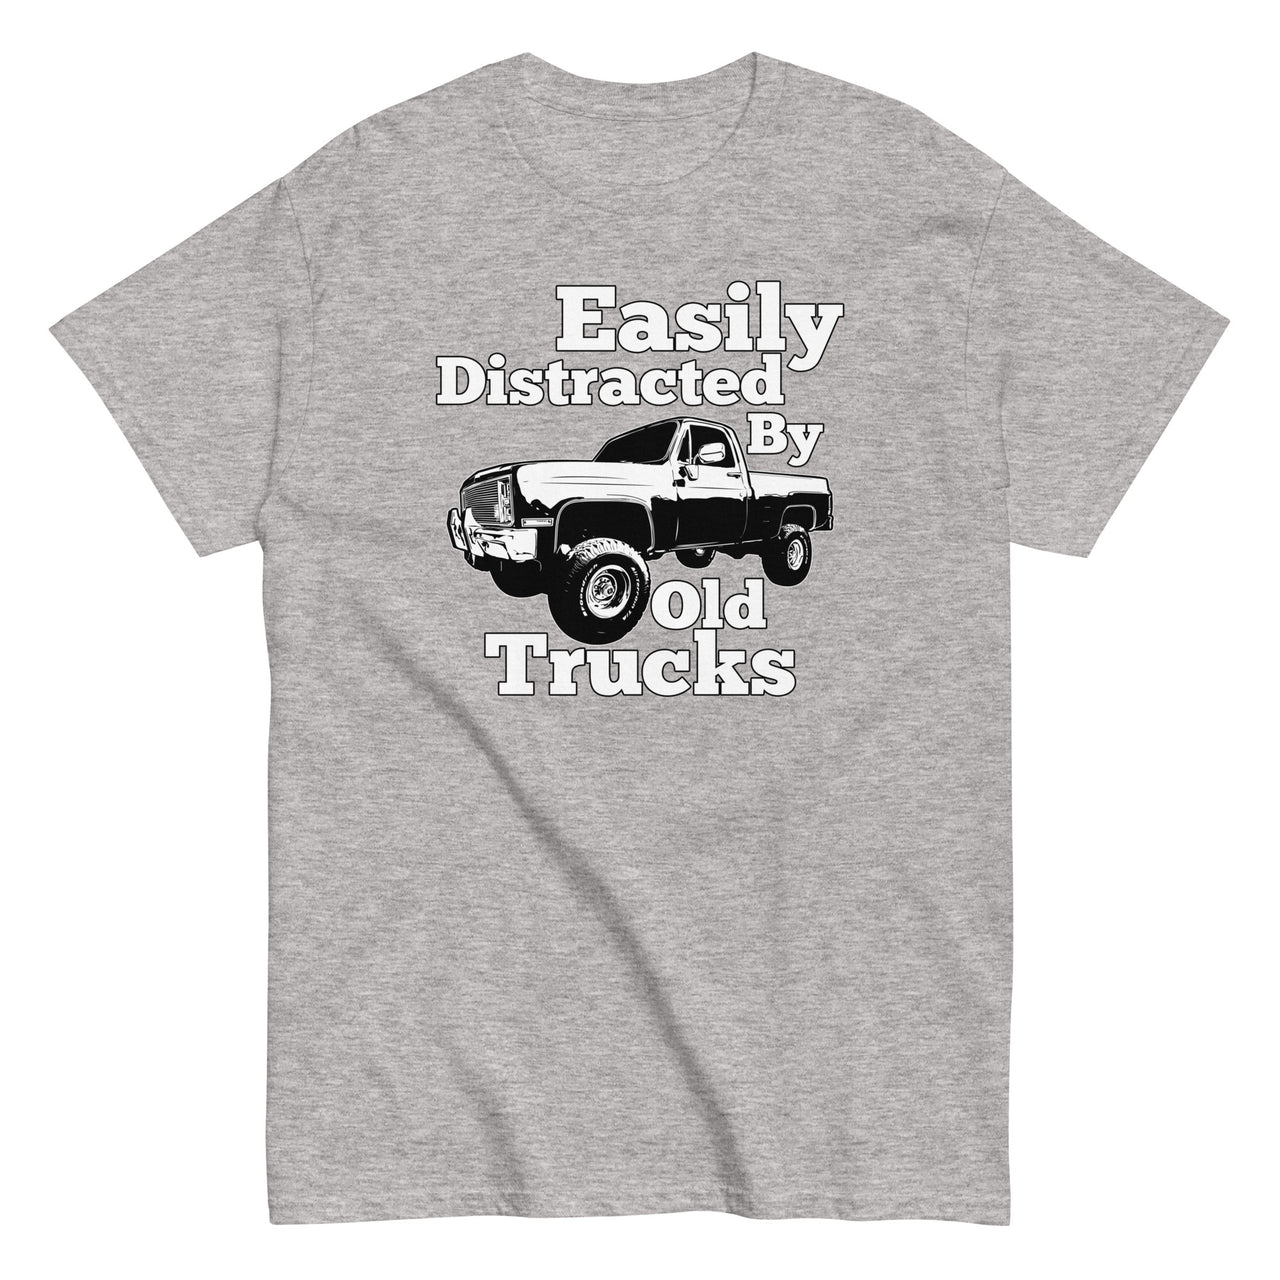 sport grey Square Body Truck T-Shirt - Easily Distracted By Old Trucks